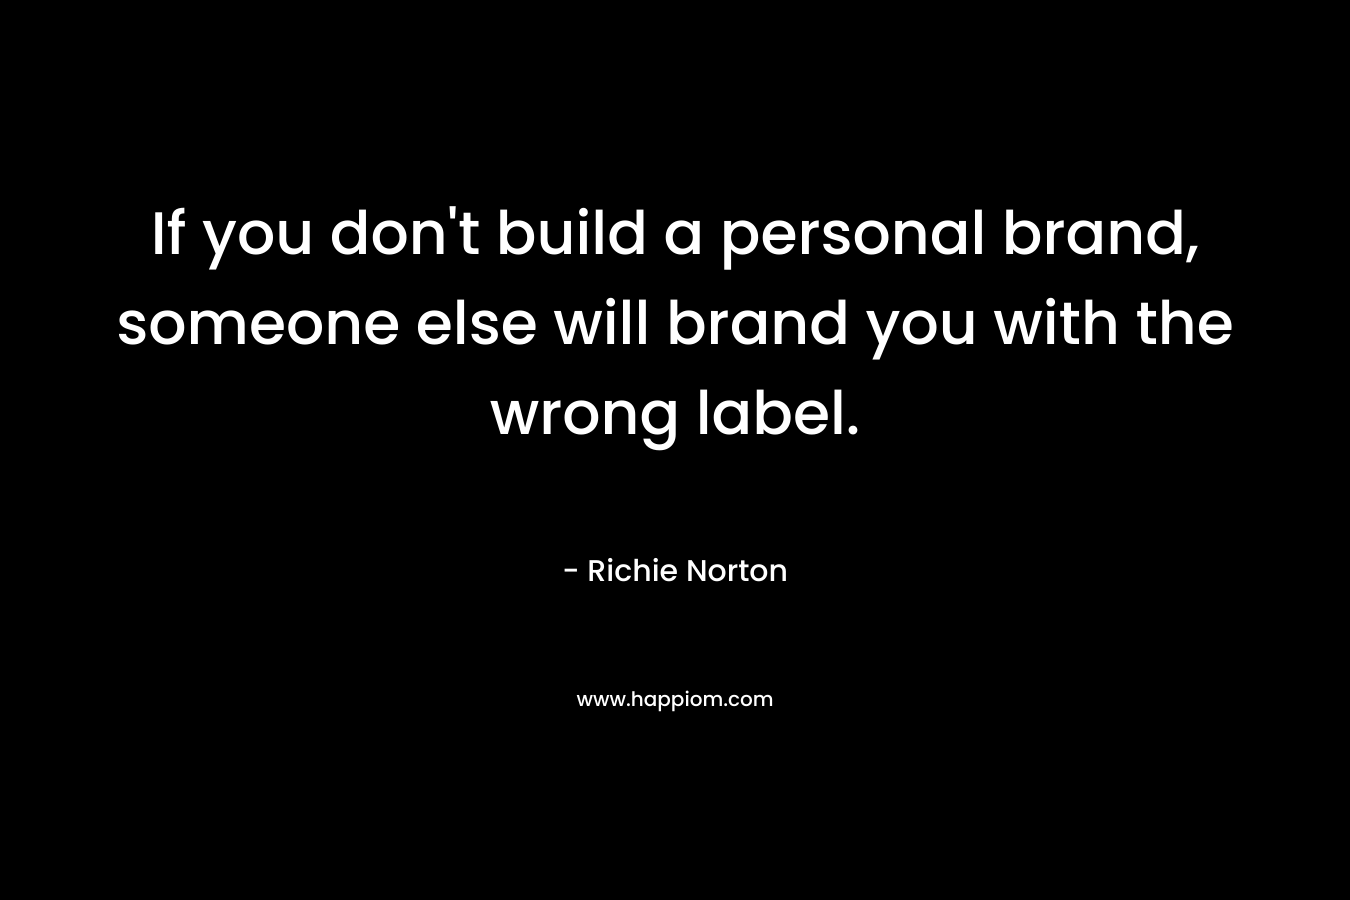 If you don't build a personal brand, someone else will brand you with the wrong label.